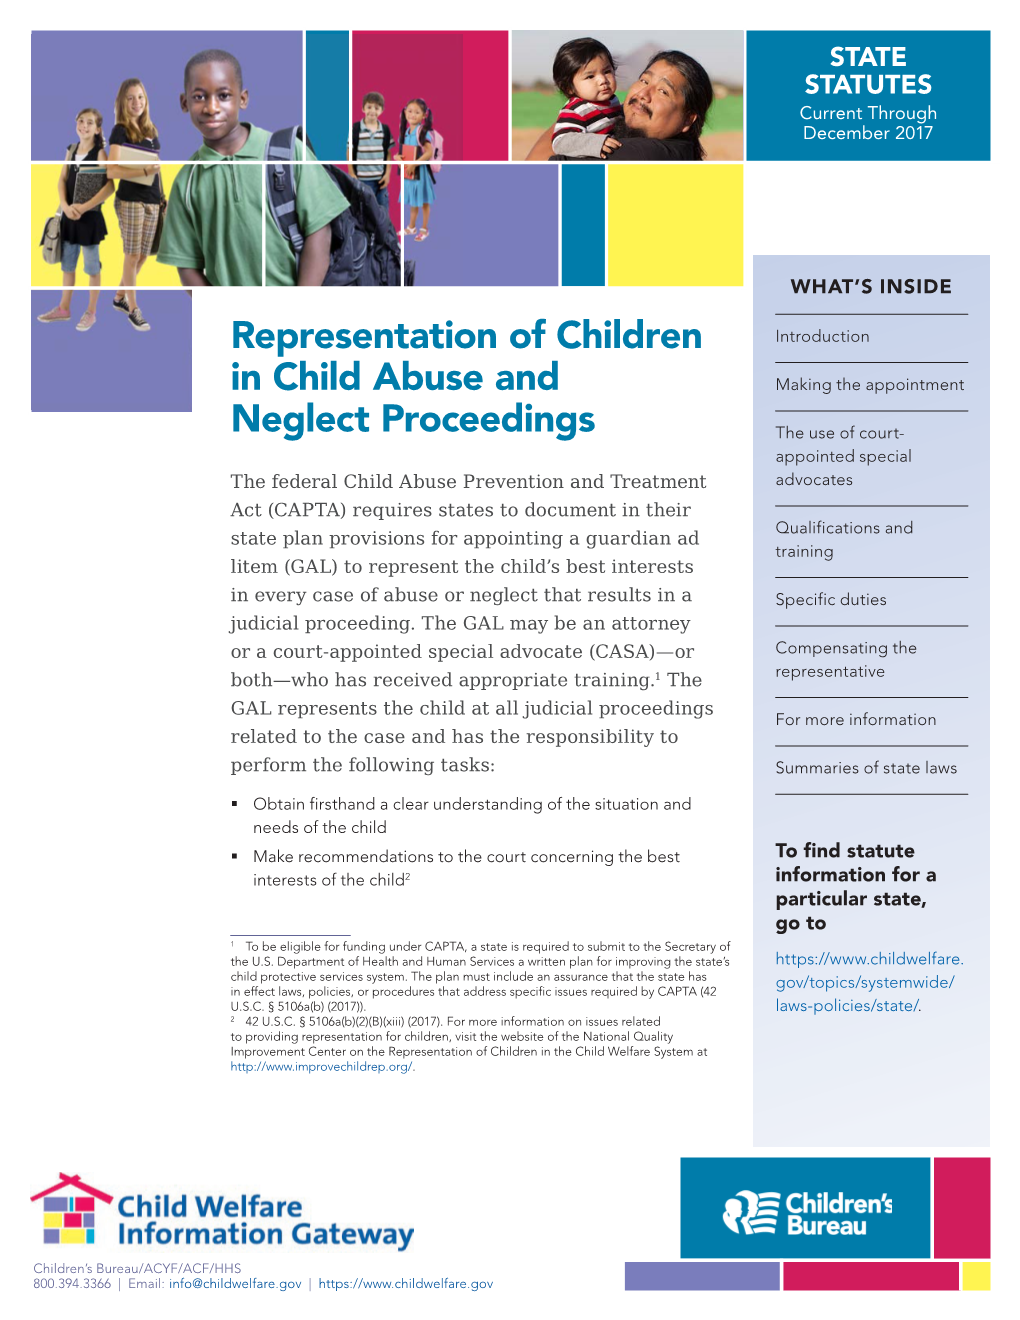 Representation of Children in Child Abuse and Neglect Proceedings